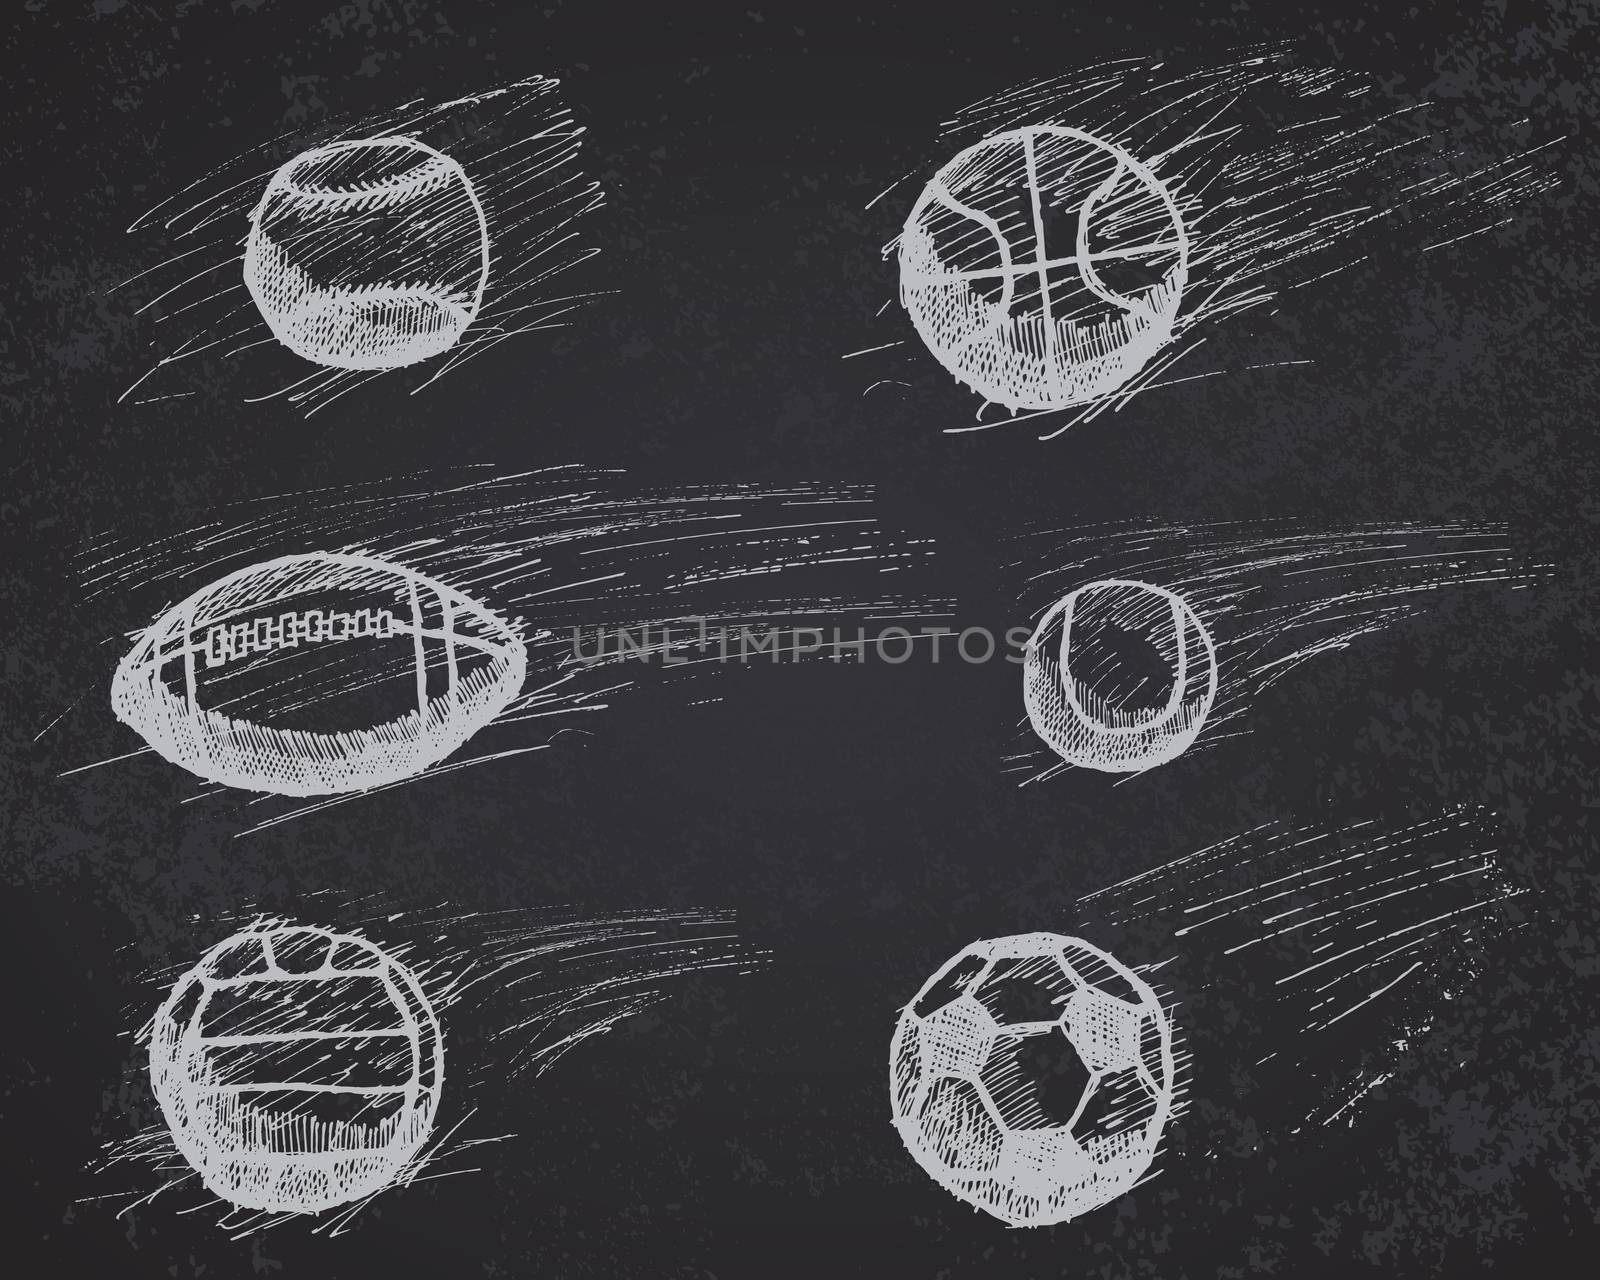 Ball sketch set with shadow and dynamic effect on blackboard.